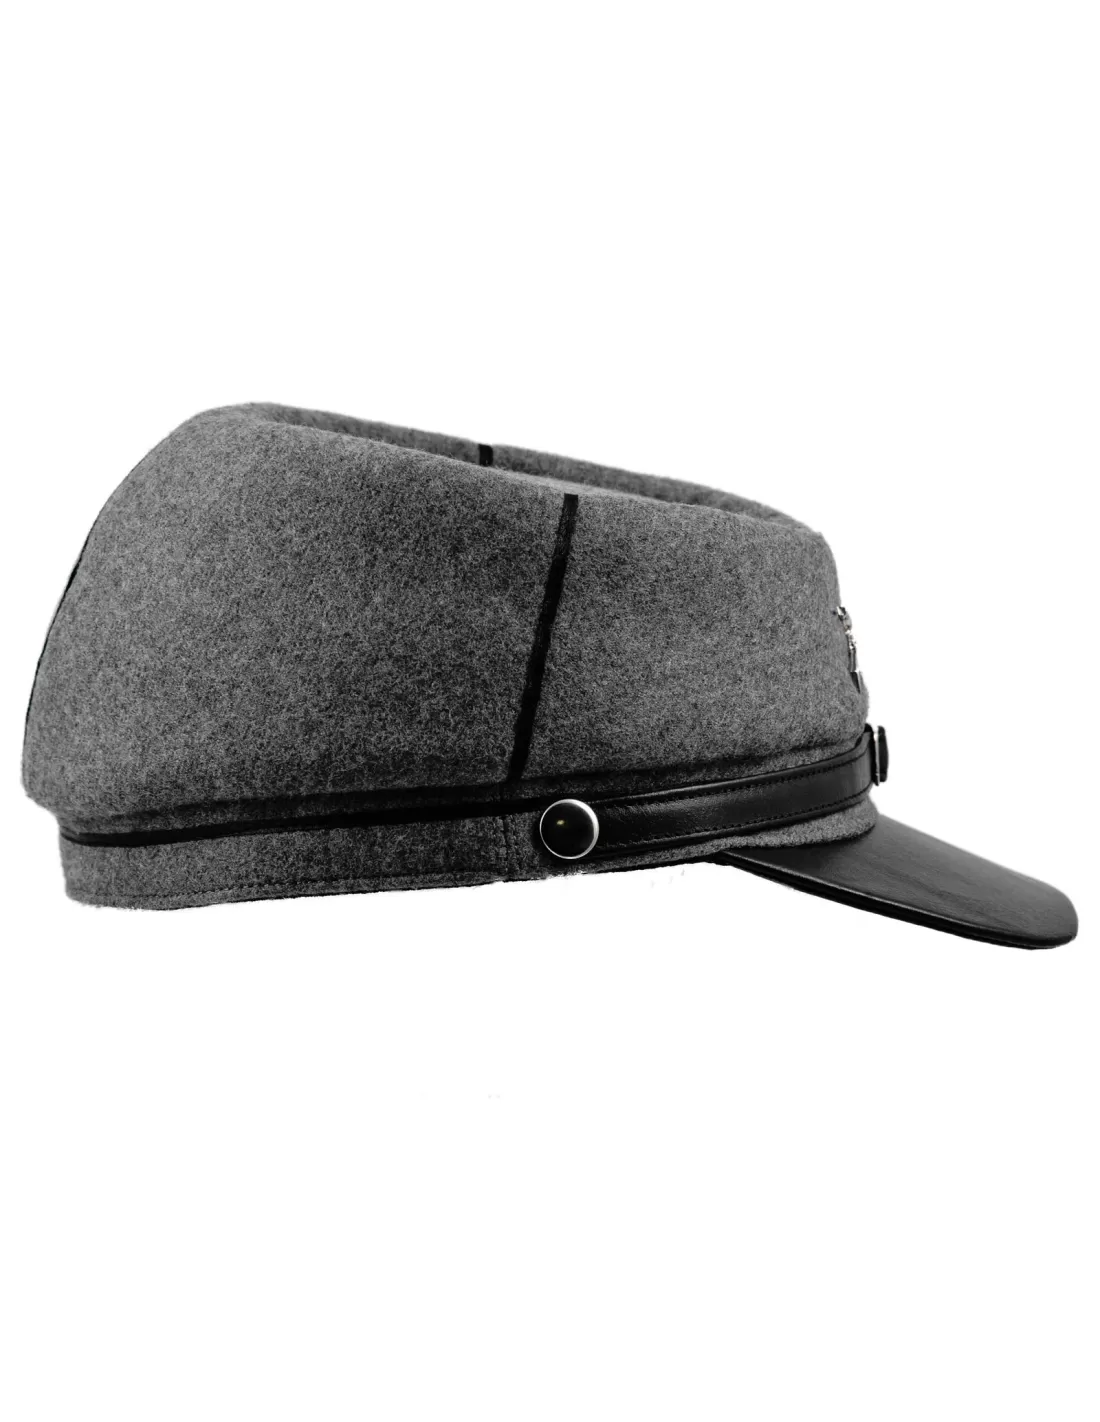 Classic War Style Leather Cap with Rifles free shipping 